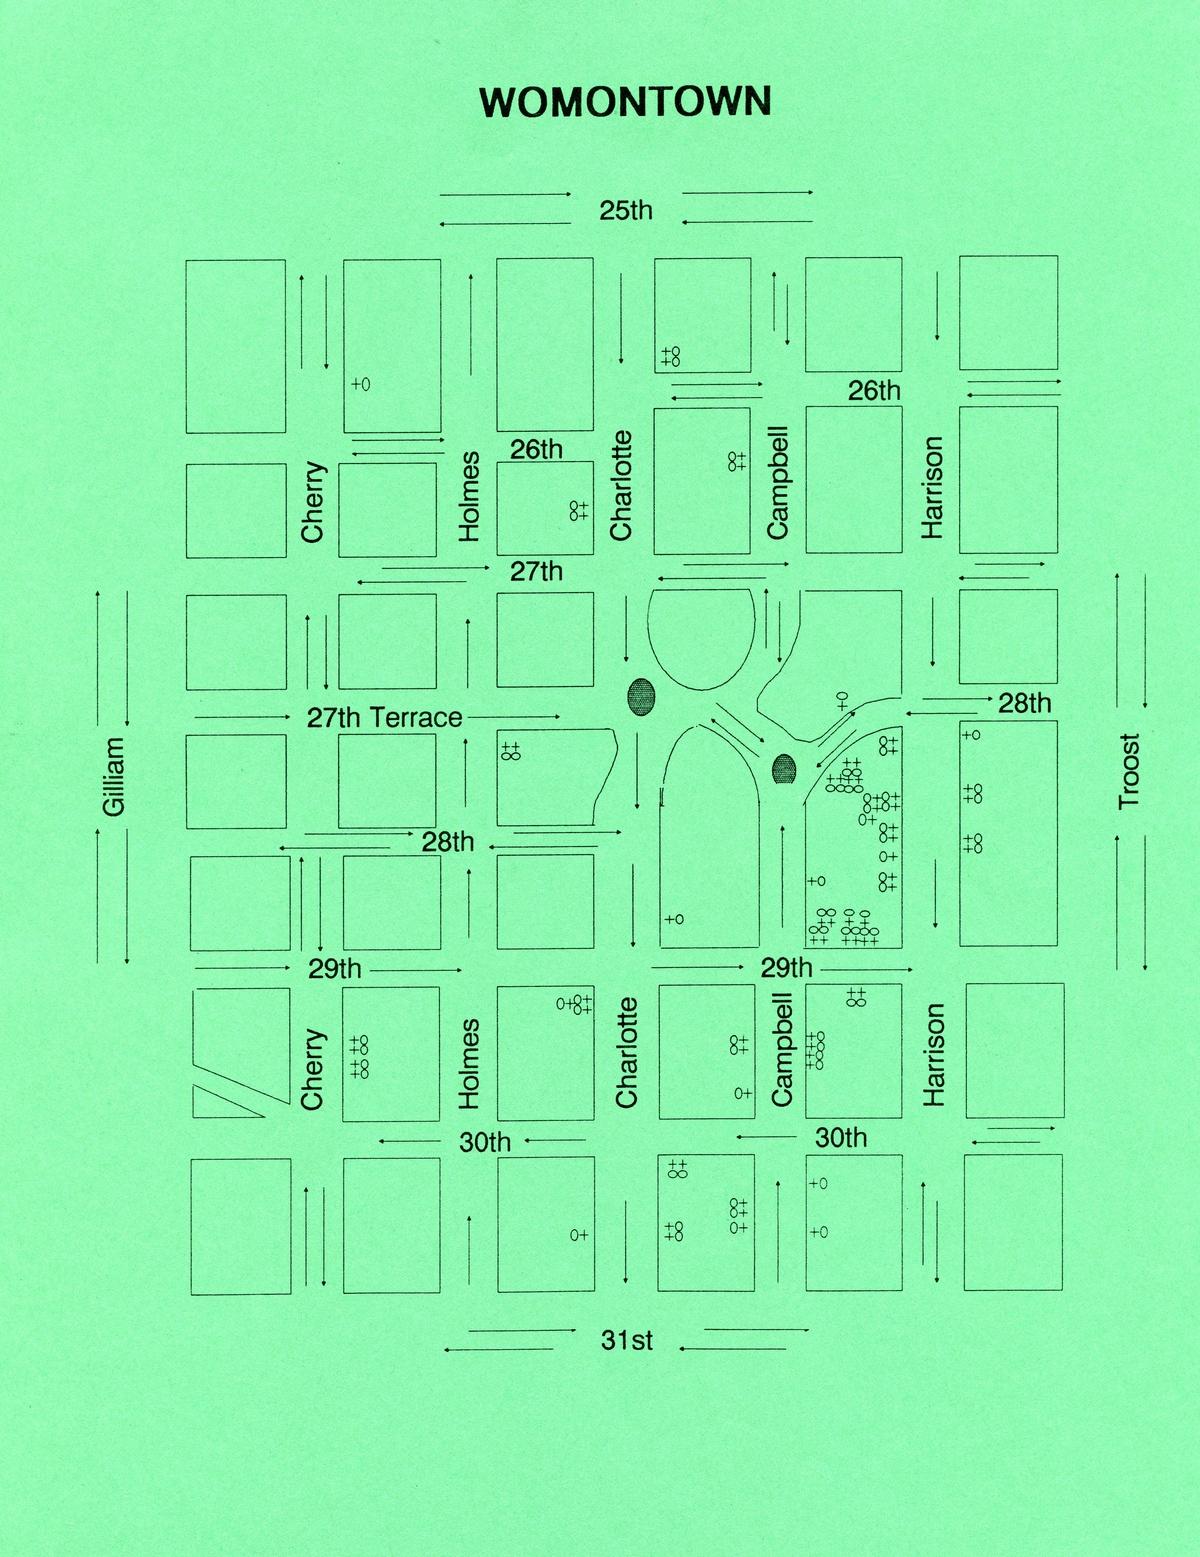 WOMONTOWN - map showing 25th street north, 31st street south, Gillham to the west and Troost to the east. Cherry, Holmes, Charlotte, Campbell and Harrison Streets are north south within the boundaries.